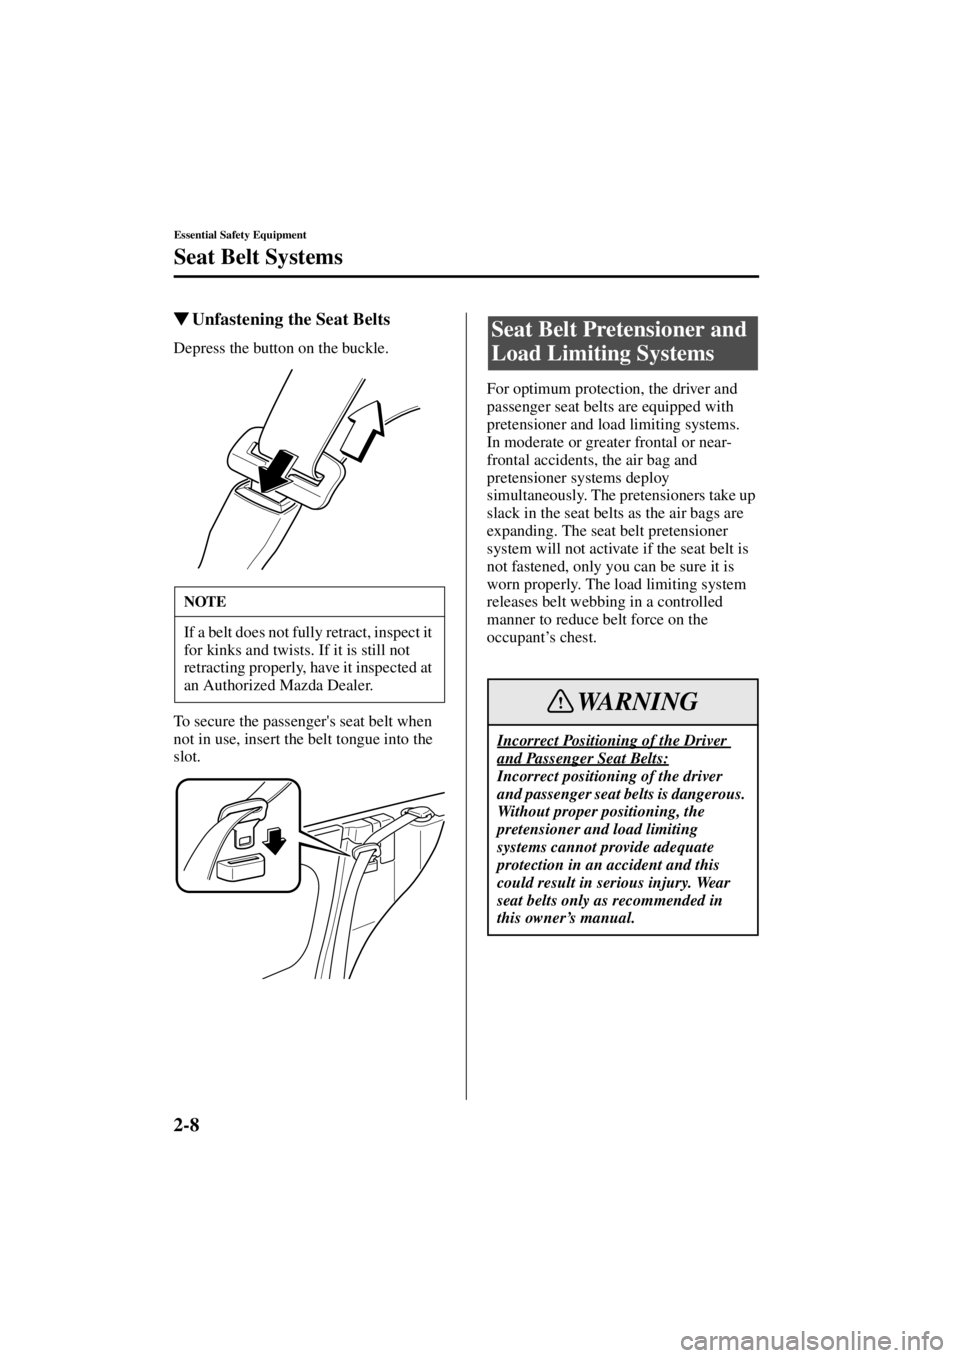 MAZDA MODEL SPEED MX-5 MIATA 2004 User Guide 2-8
Essential Safety Equipment
Seat Belt Systems
Form No. 8T02-EA-03L
Unfastening the Seat Belts
Depress the button on the buckle.
To secure the passengers seat belt when 
not in use, insert the bel